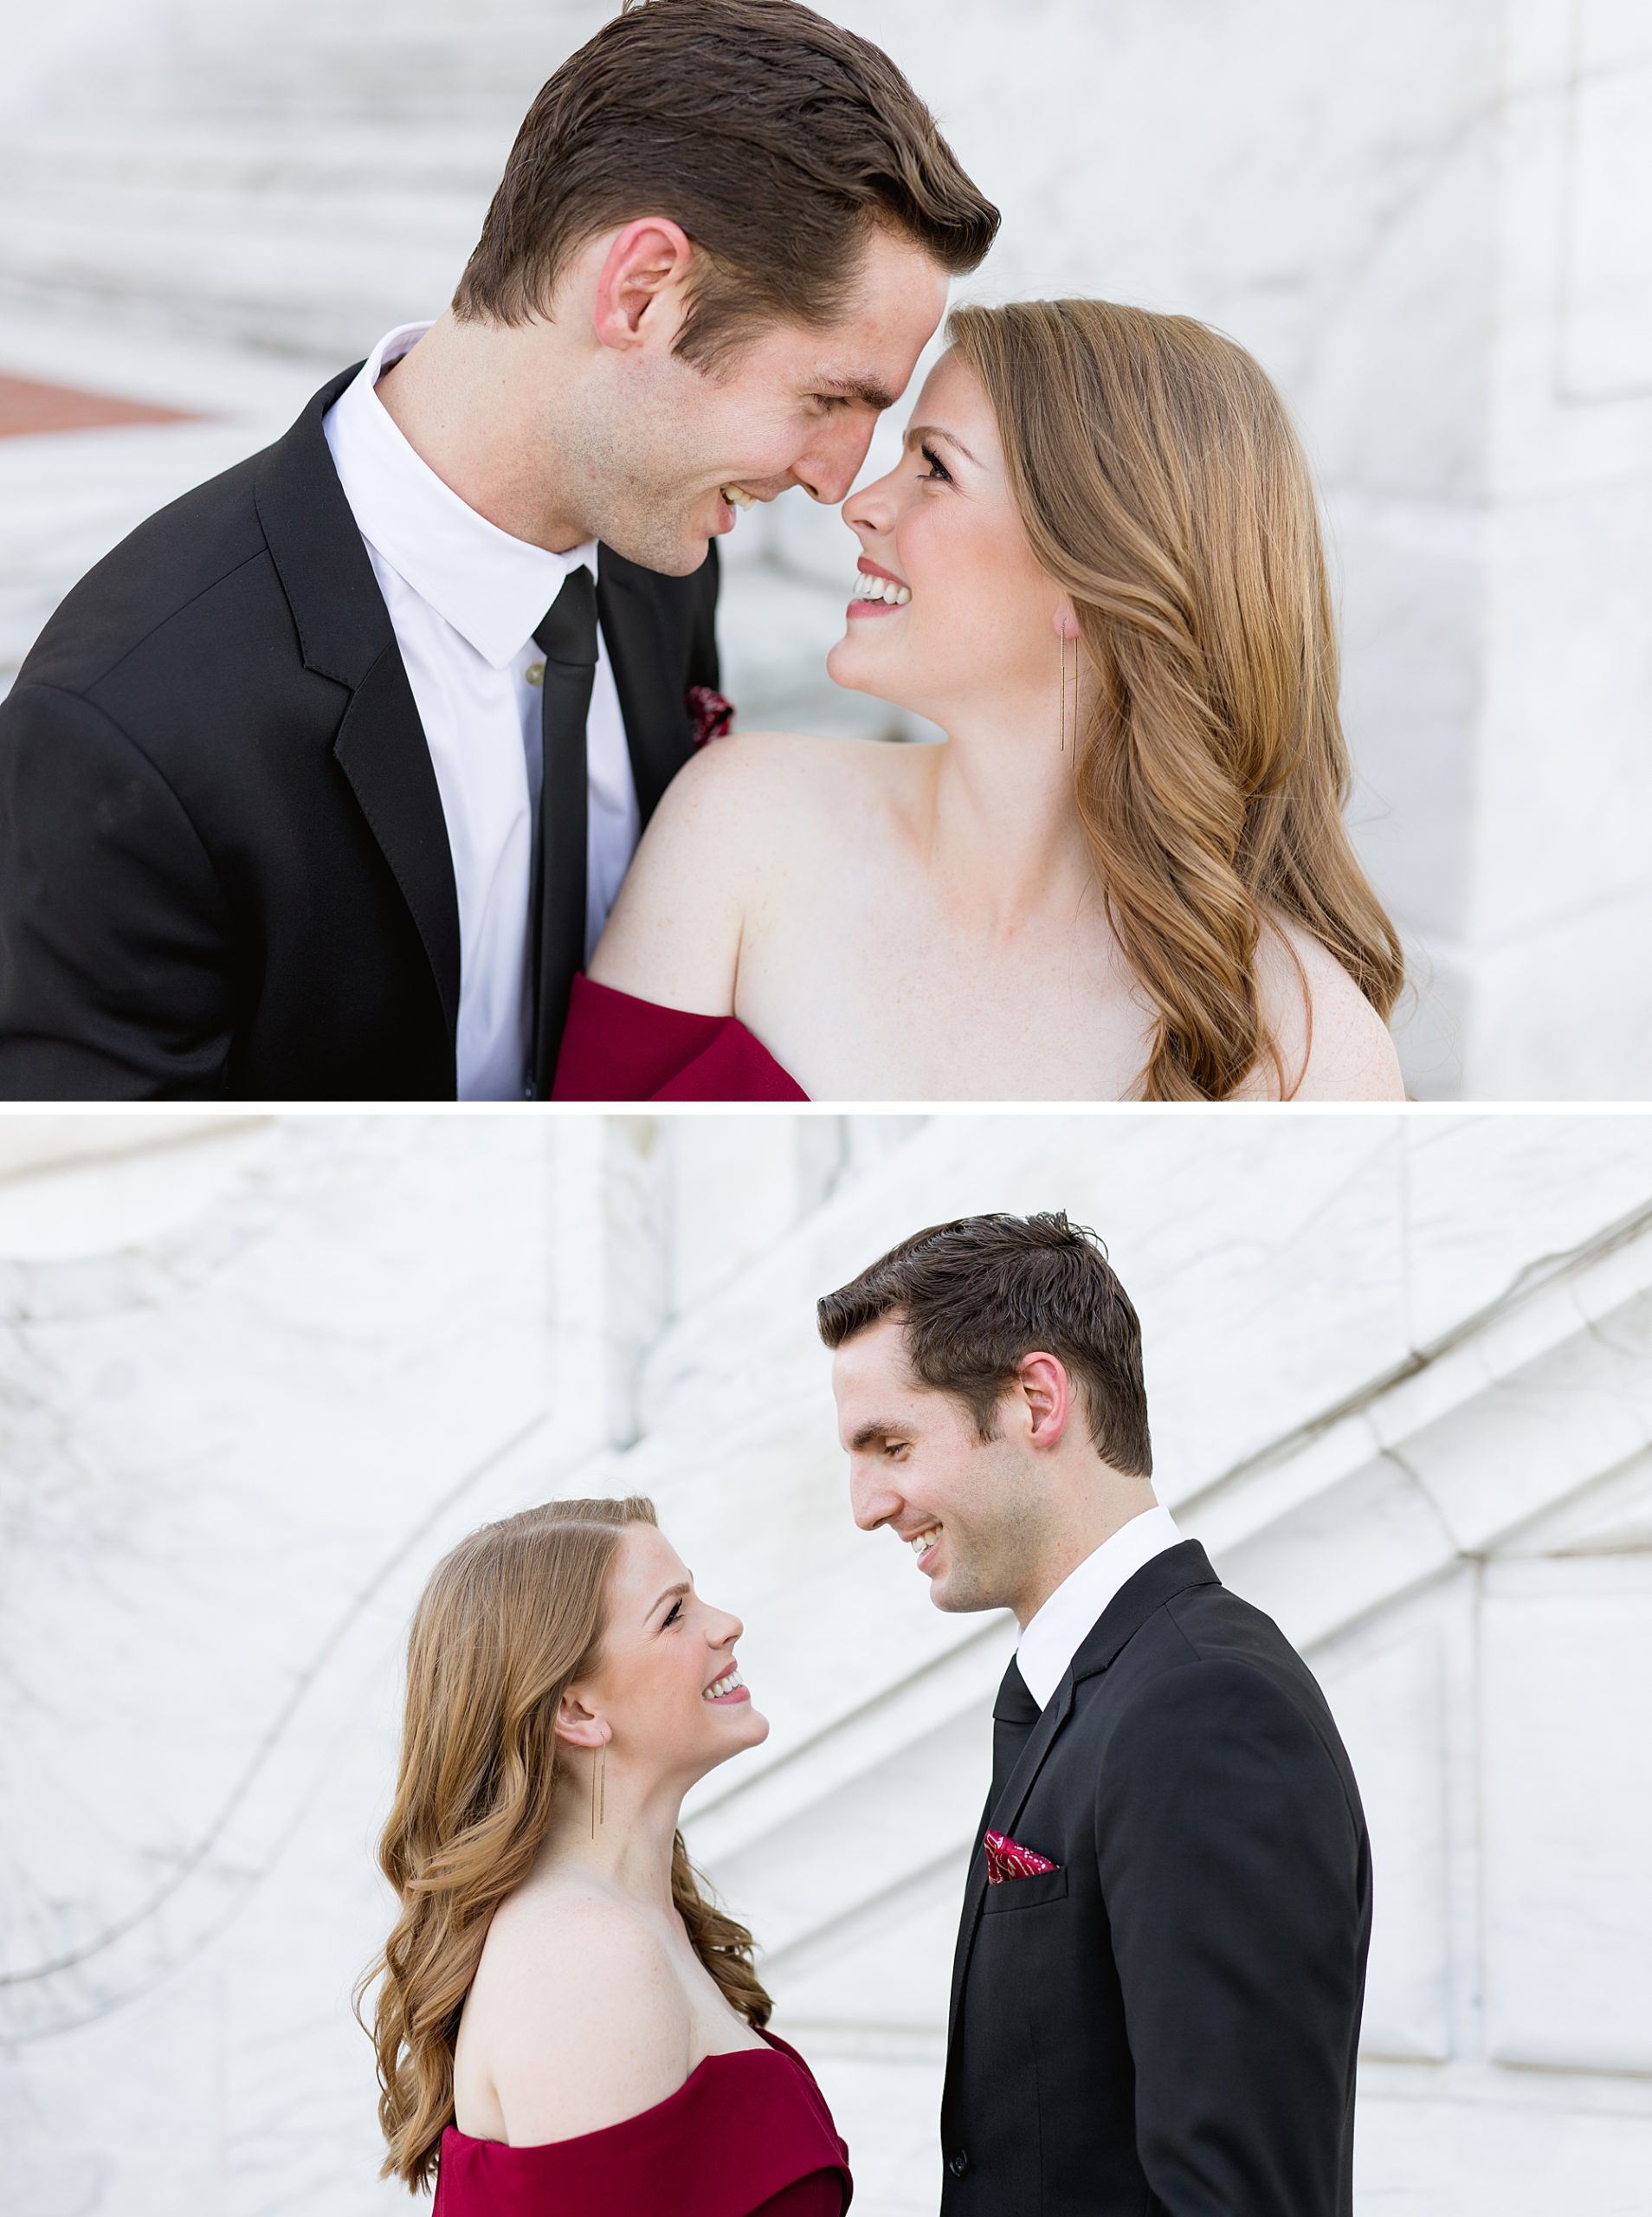 Couple in love | Engagement Poses | Breanne Rochelle Photography